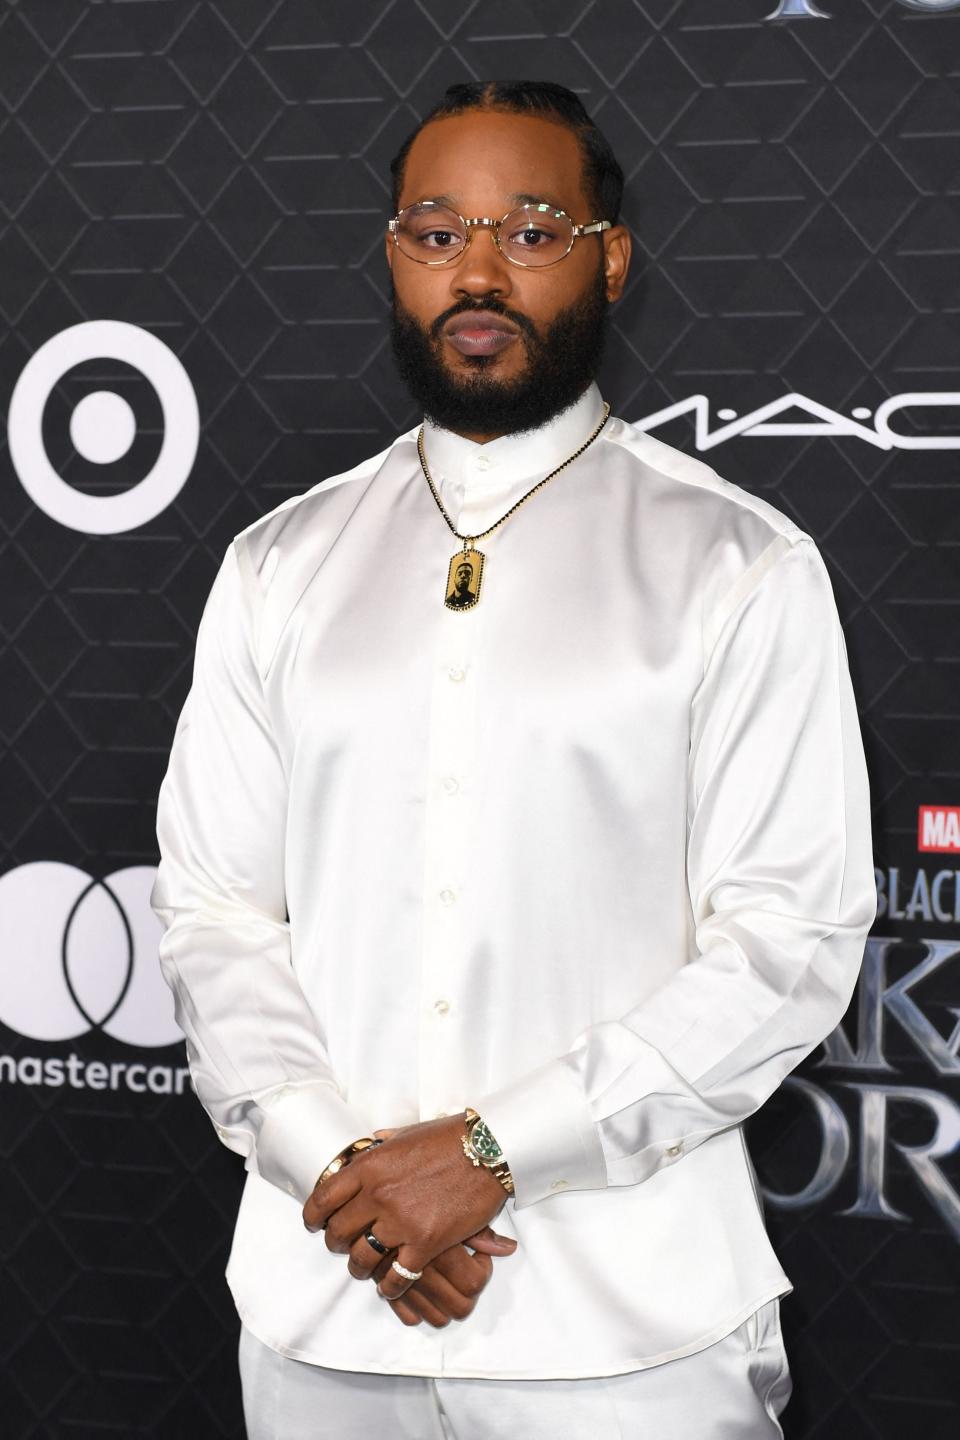 Director Ryan Coogler arrives for the world premiere of Marvel Studios' "Black Panther: Wakanda Forever" at the Dolby Theatre in Hollywood, California, on October 26, 2022. (Photo by VALERIE MACON / AFP) (Photo by VALERIE MACON/AFP via Getty Images) ORIG FILE ID: AFP_32M88YM.jpg